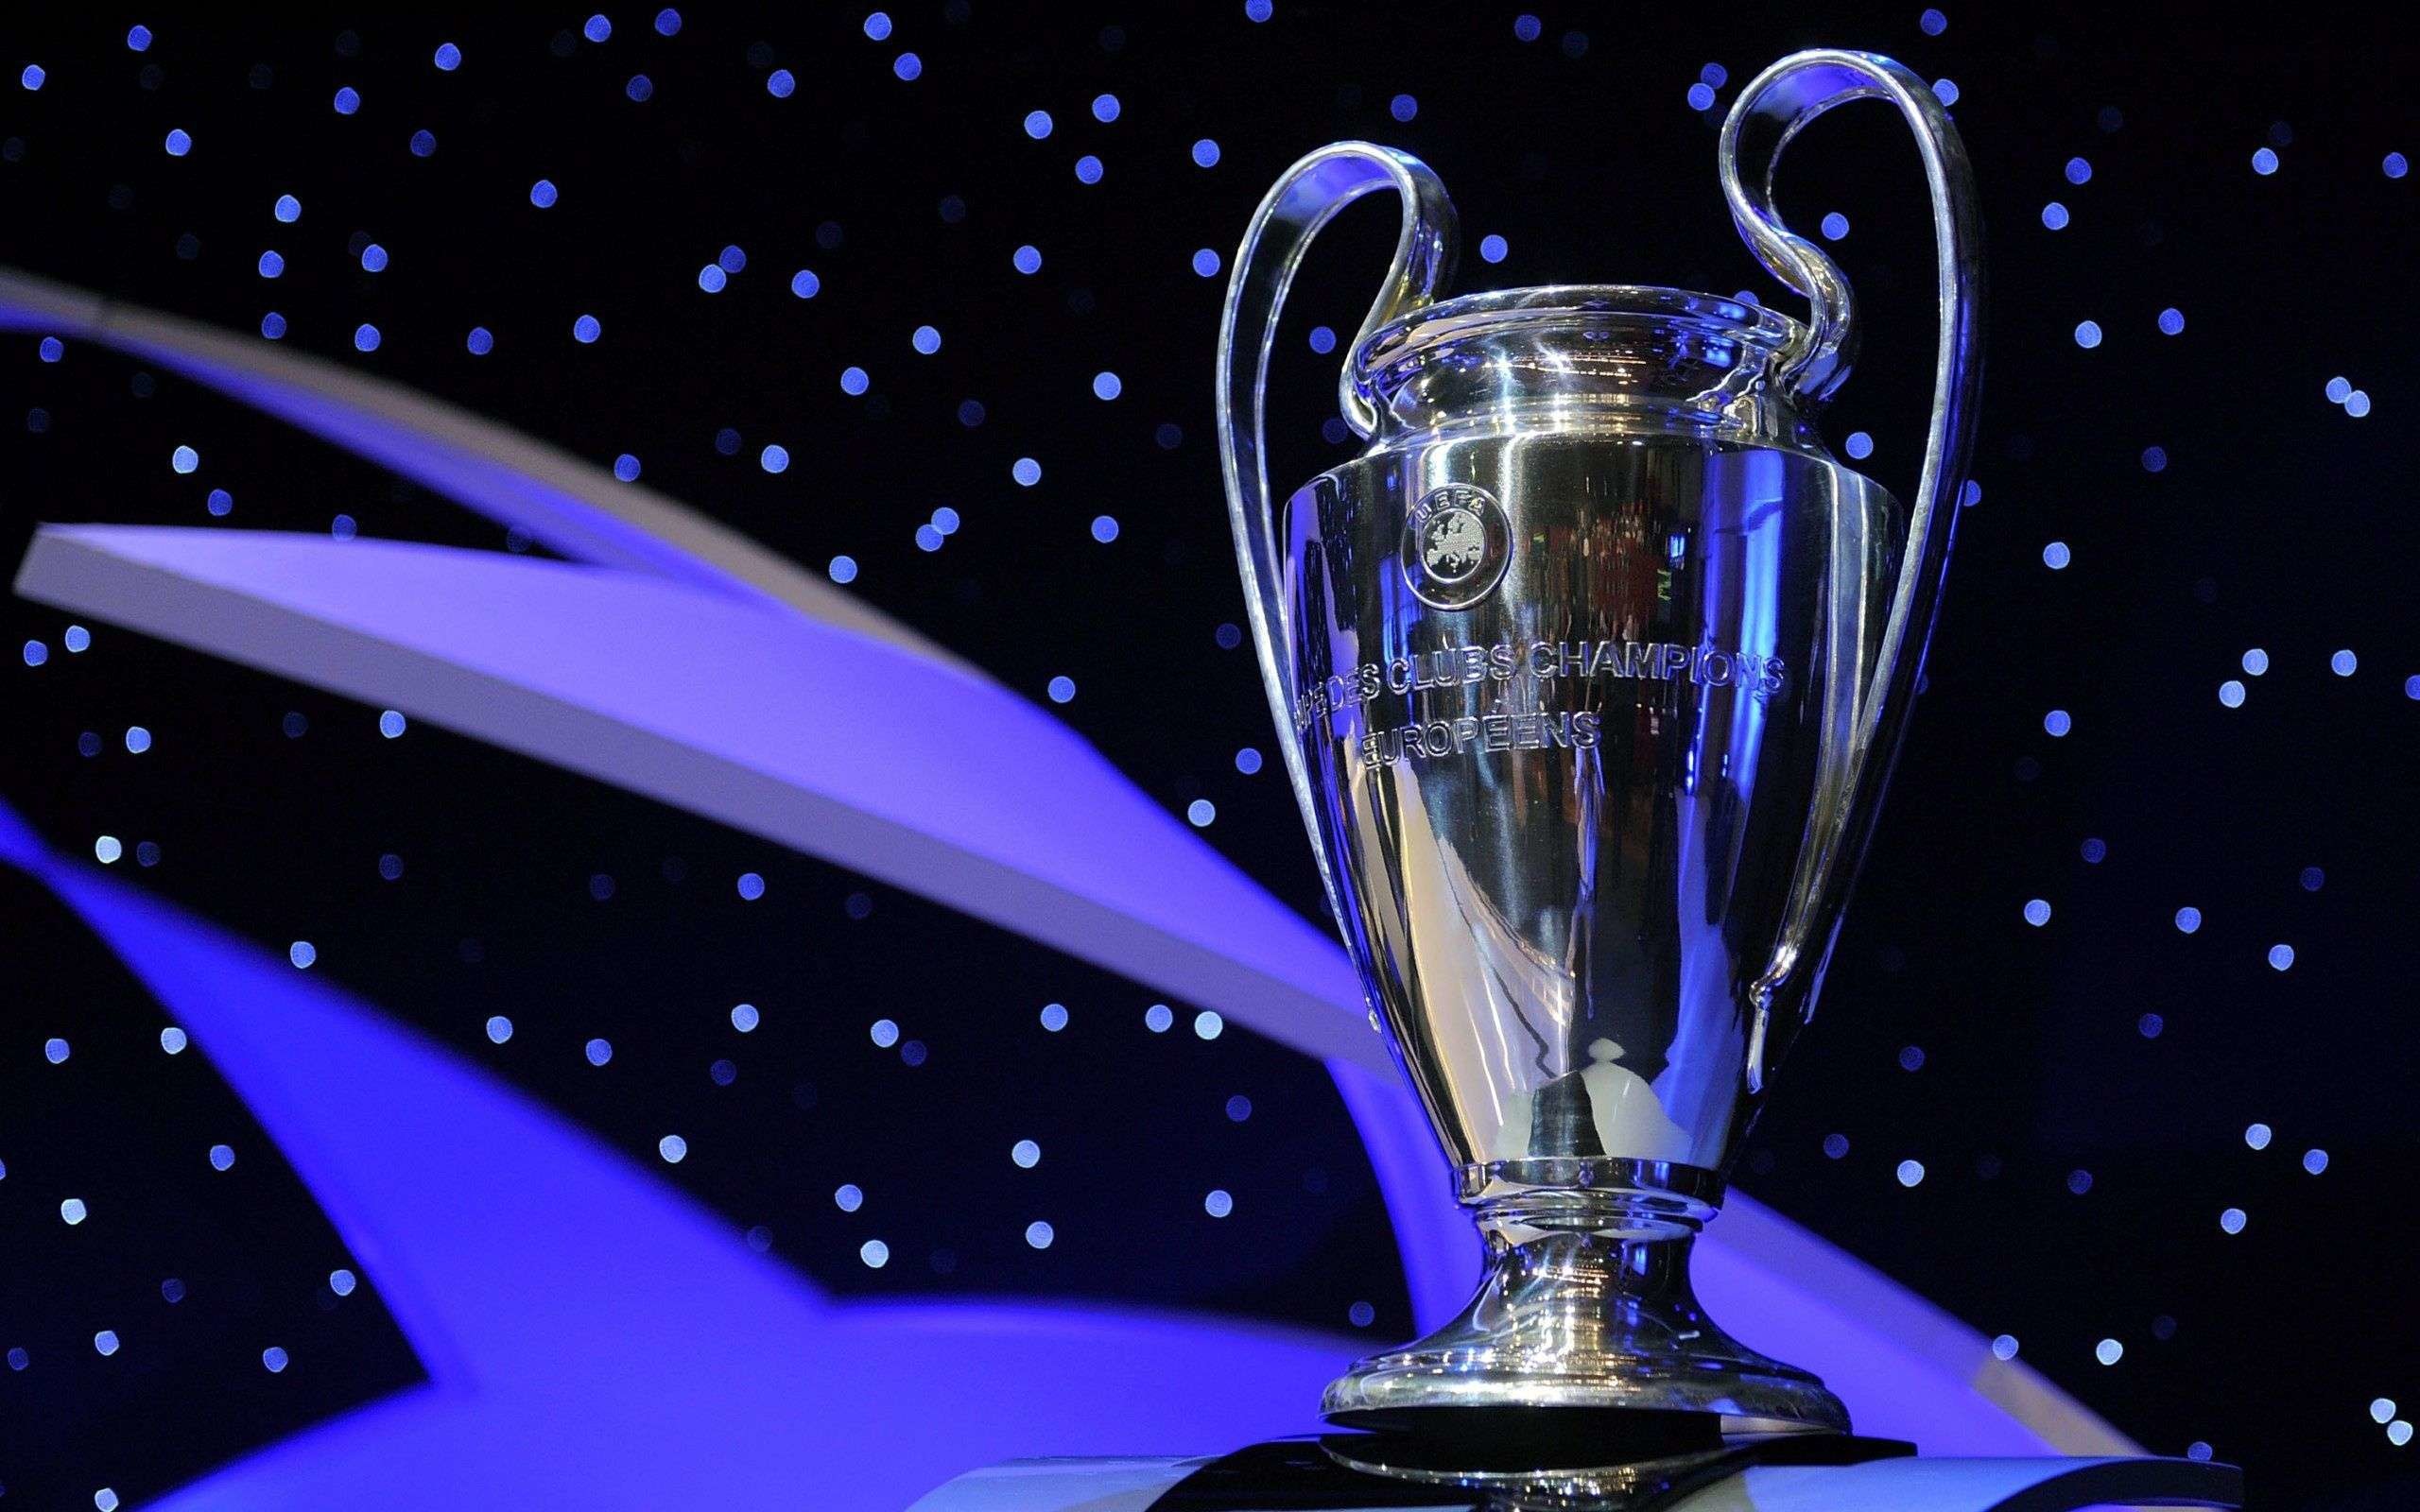 uefa champions league intro download free